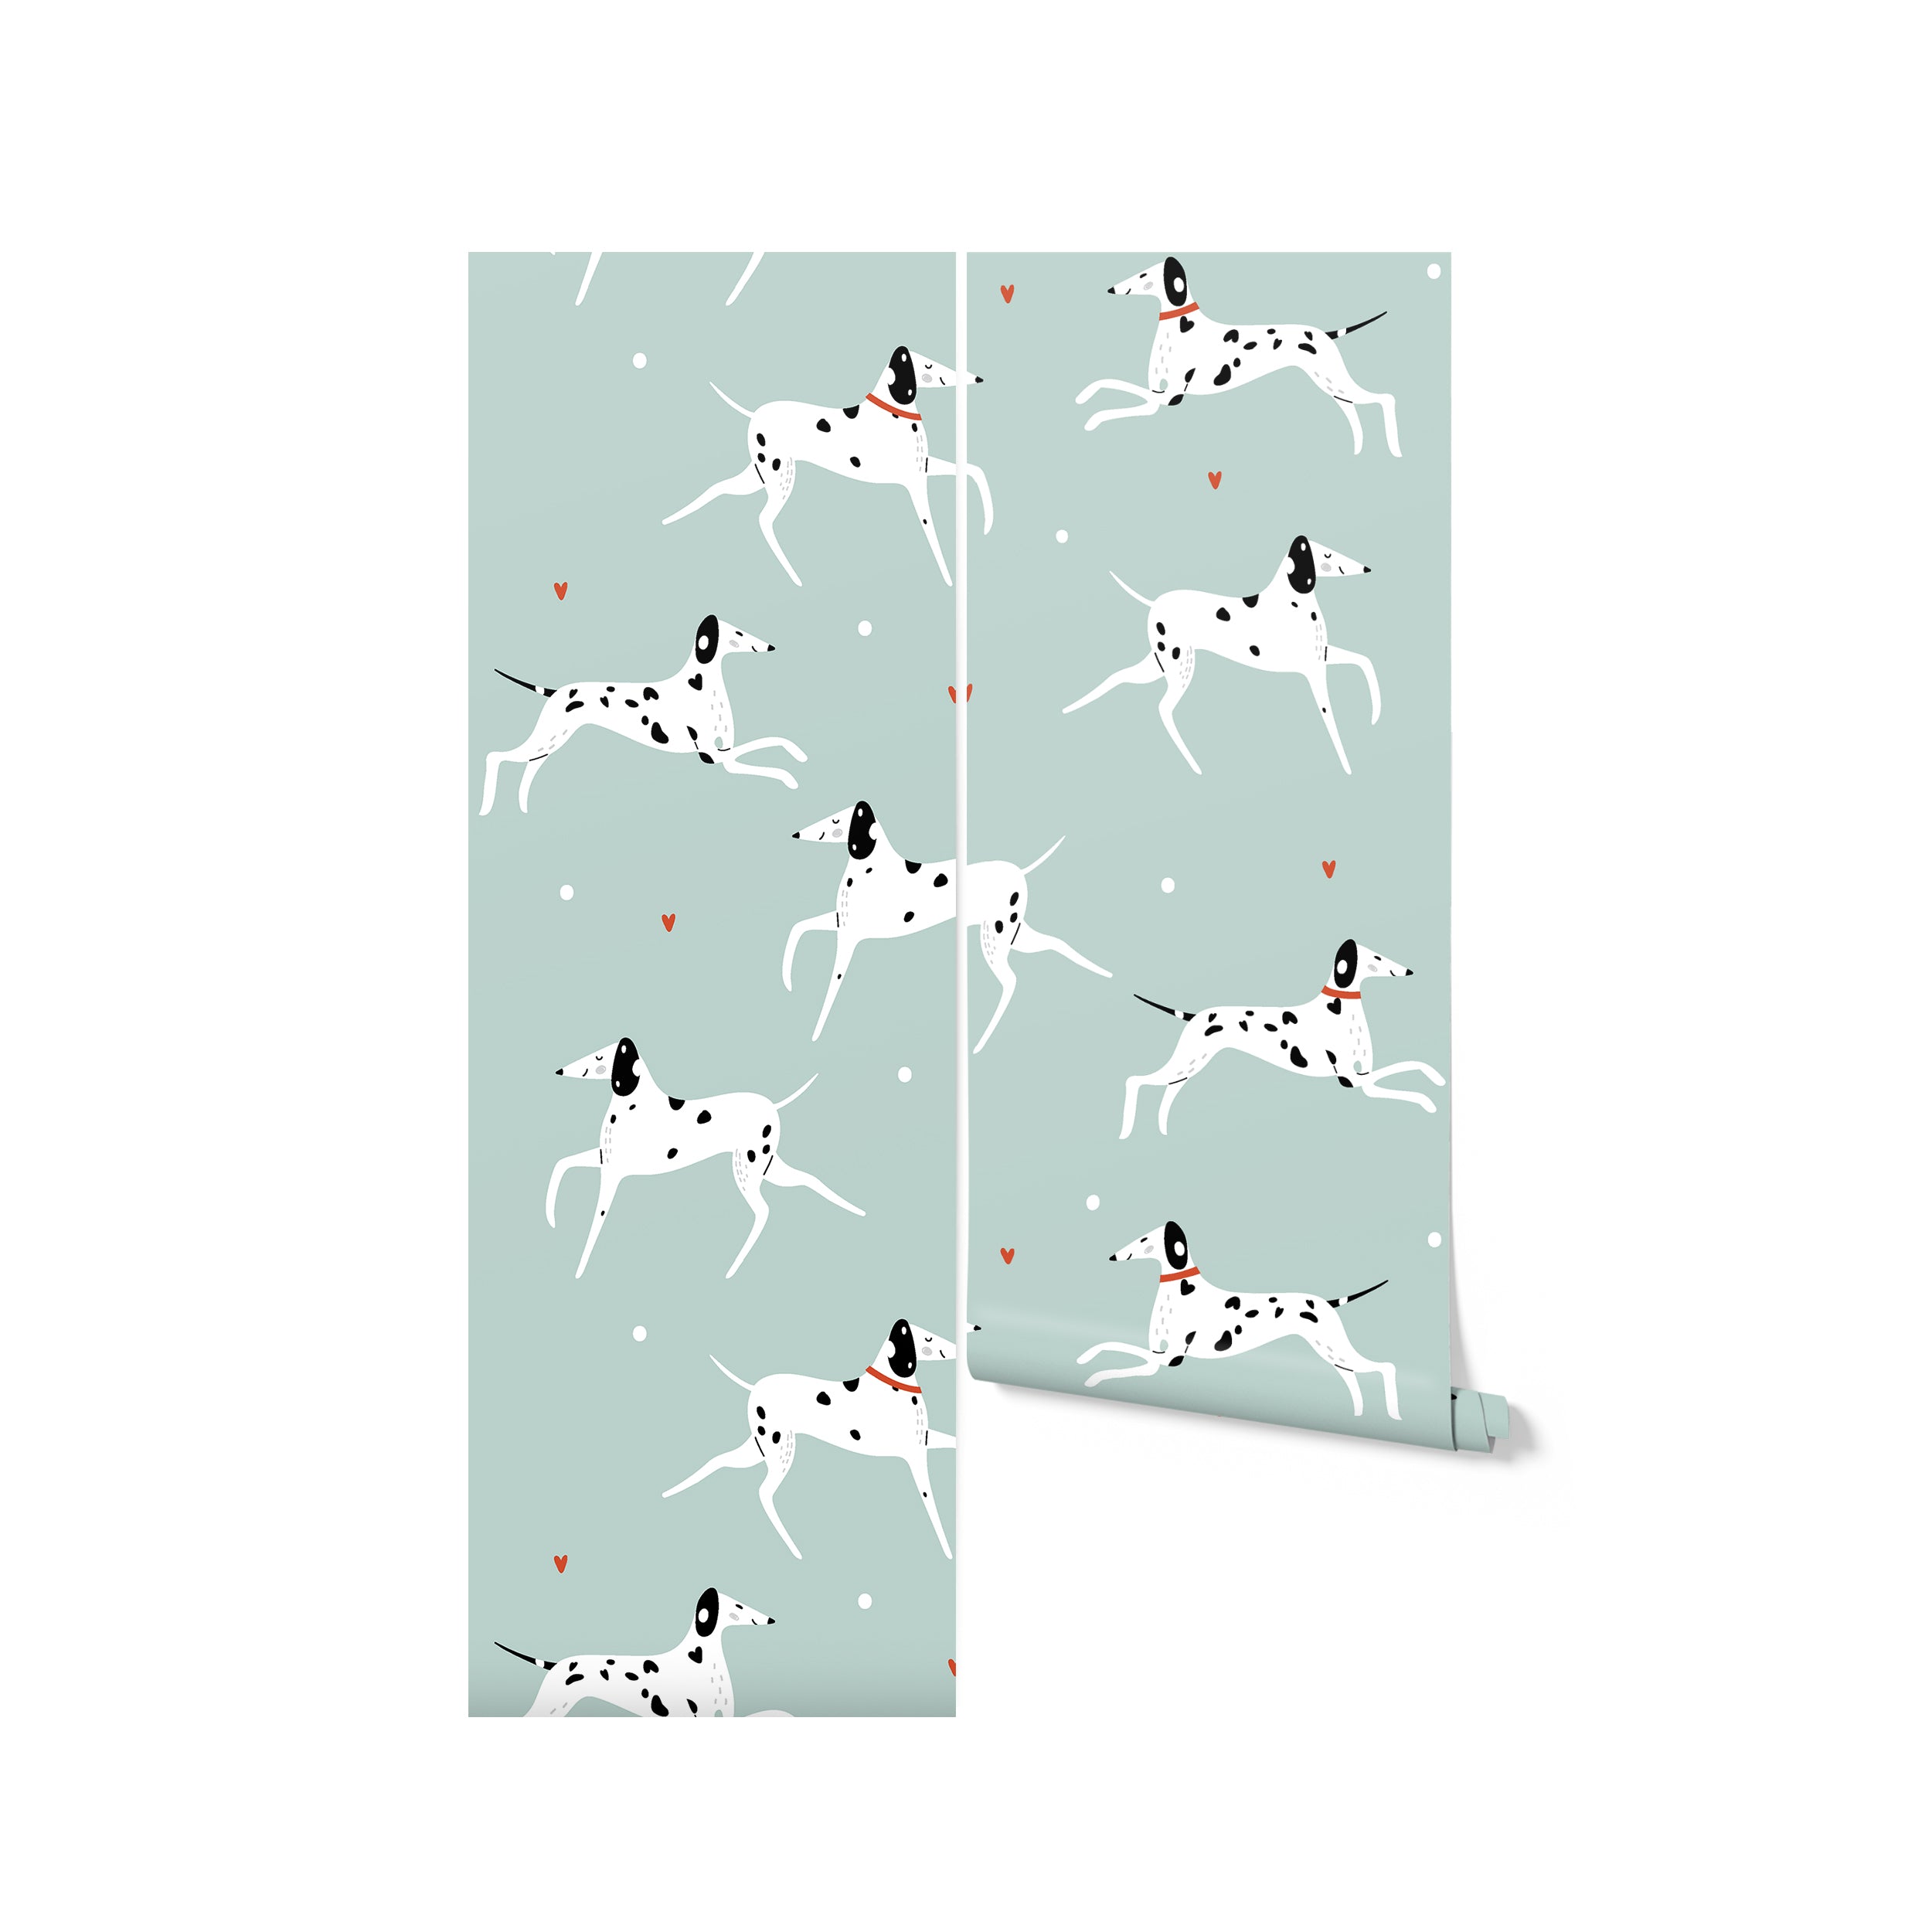 Roll of 'Let's Pawty! Kids Wallpaper' displaying a playful pattern of white Dalmatian dogs with black spots on a mint green background. The design features dogs in mid-run, interspersed with tiny red hearts and dots, perfect for a child's room or nursery